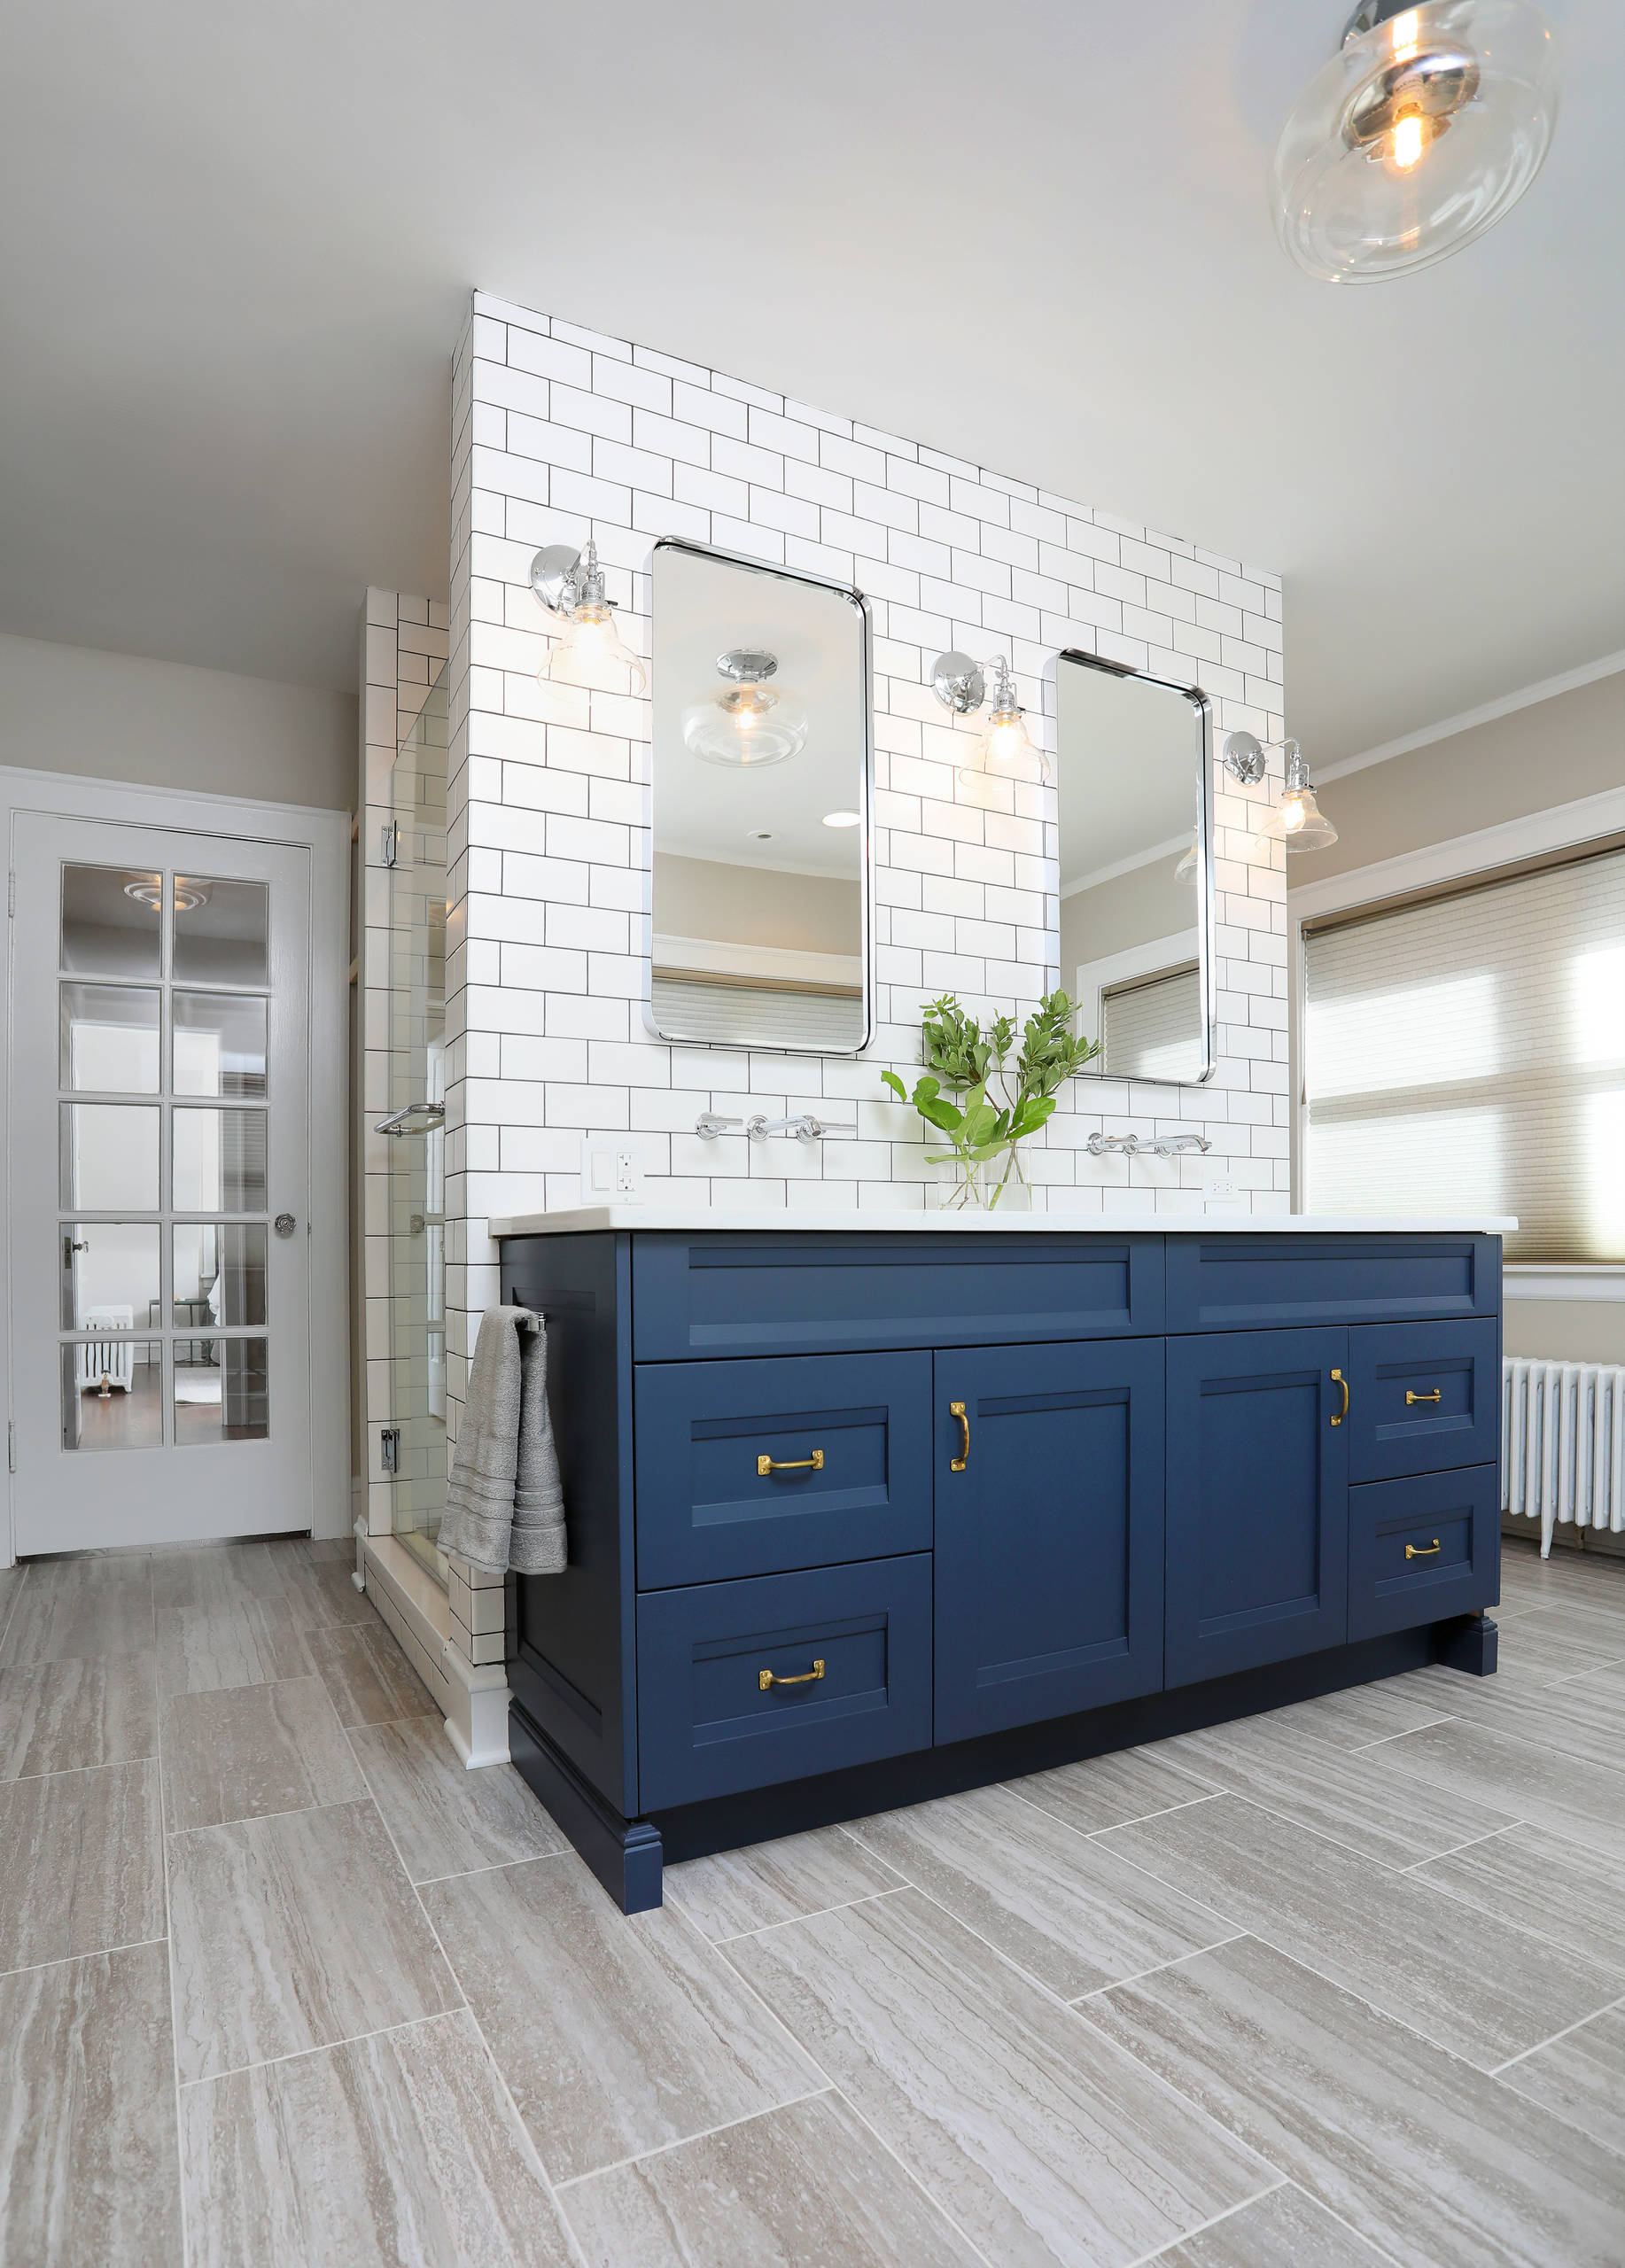 https://st.hzcdn.com/simgs/pictures/bathrooms/eclectic-navy-and-white-master-bathroom-normandy-remodeling-img~e961bb7f0b880ced_14-7964-1-01411f9.jpg